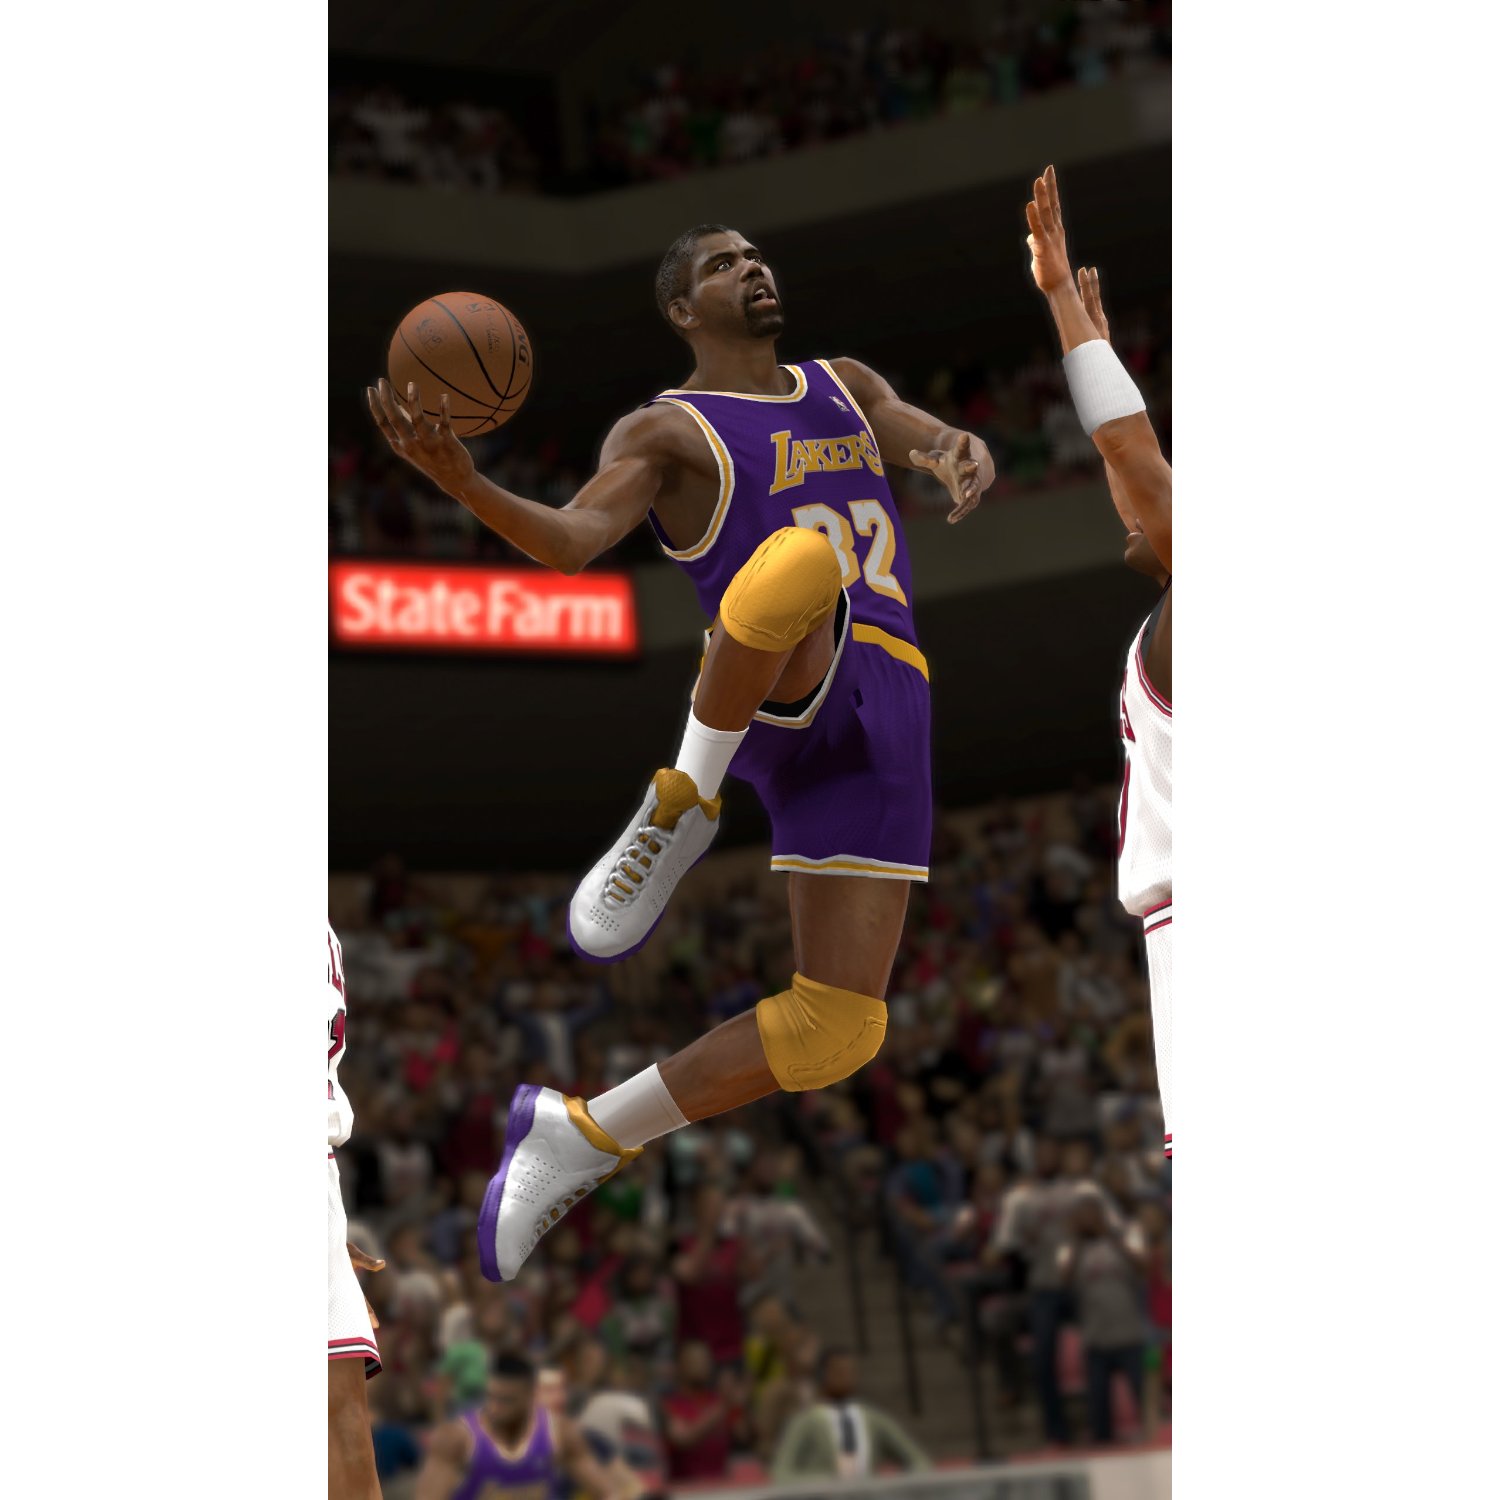 http://thetechjournal.com/wp-content/uploads/images/1109/1316953461-nba-2k12--game-for-preorder-now-3.jpg